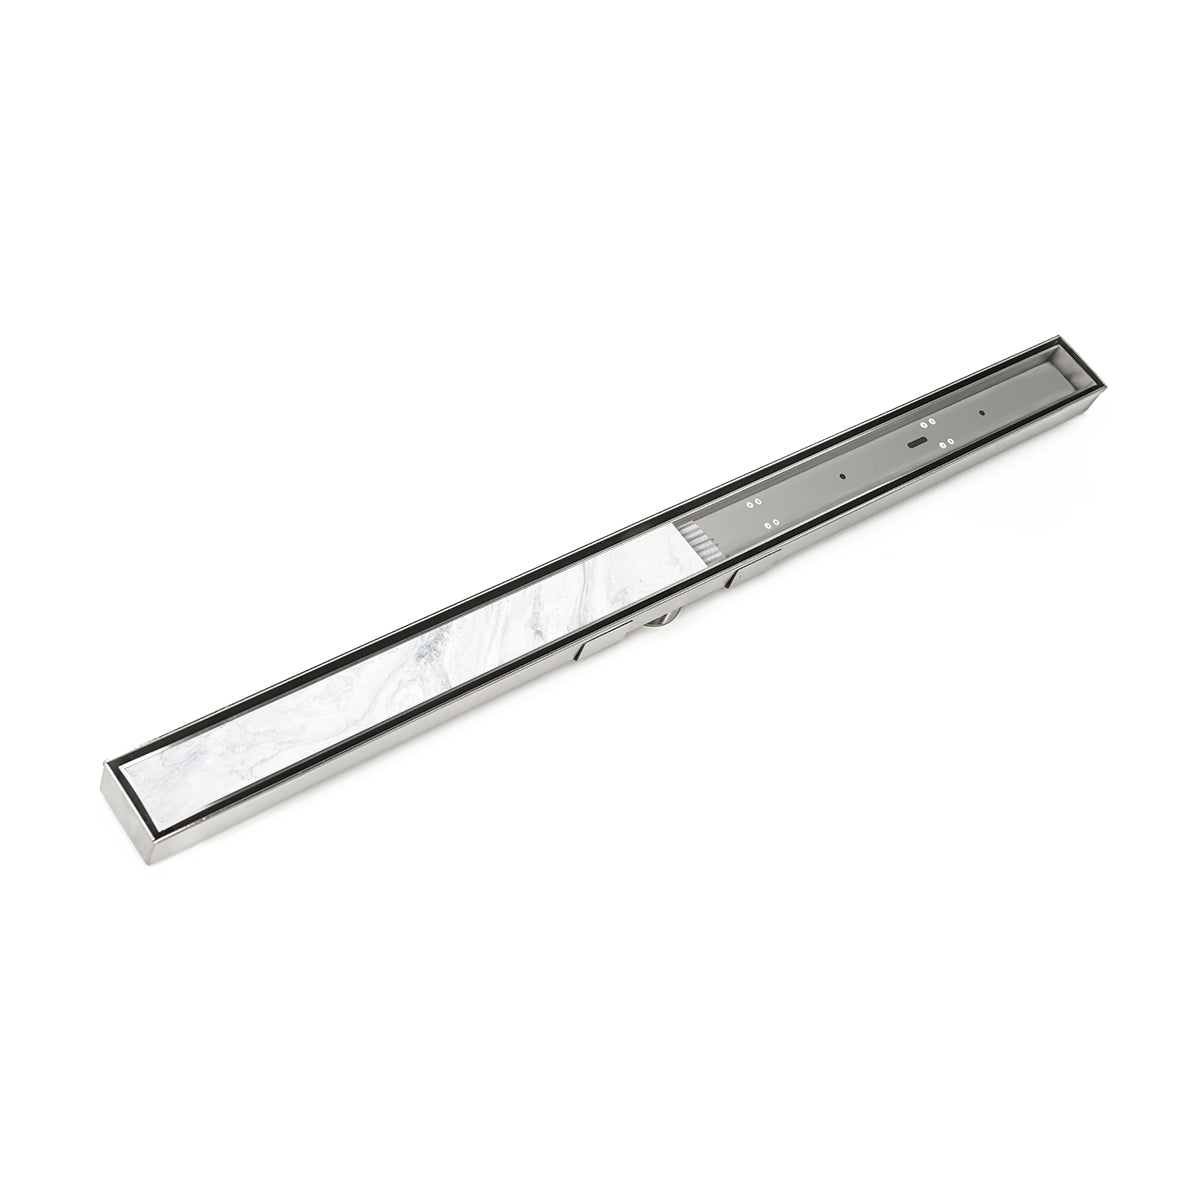 Infinity Drain 72" S-Stainless Steel Series Site Sizable Linear Drain Kit with Low Profile Tile Insert Frame